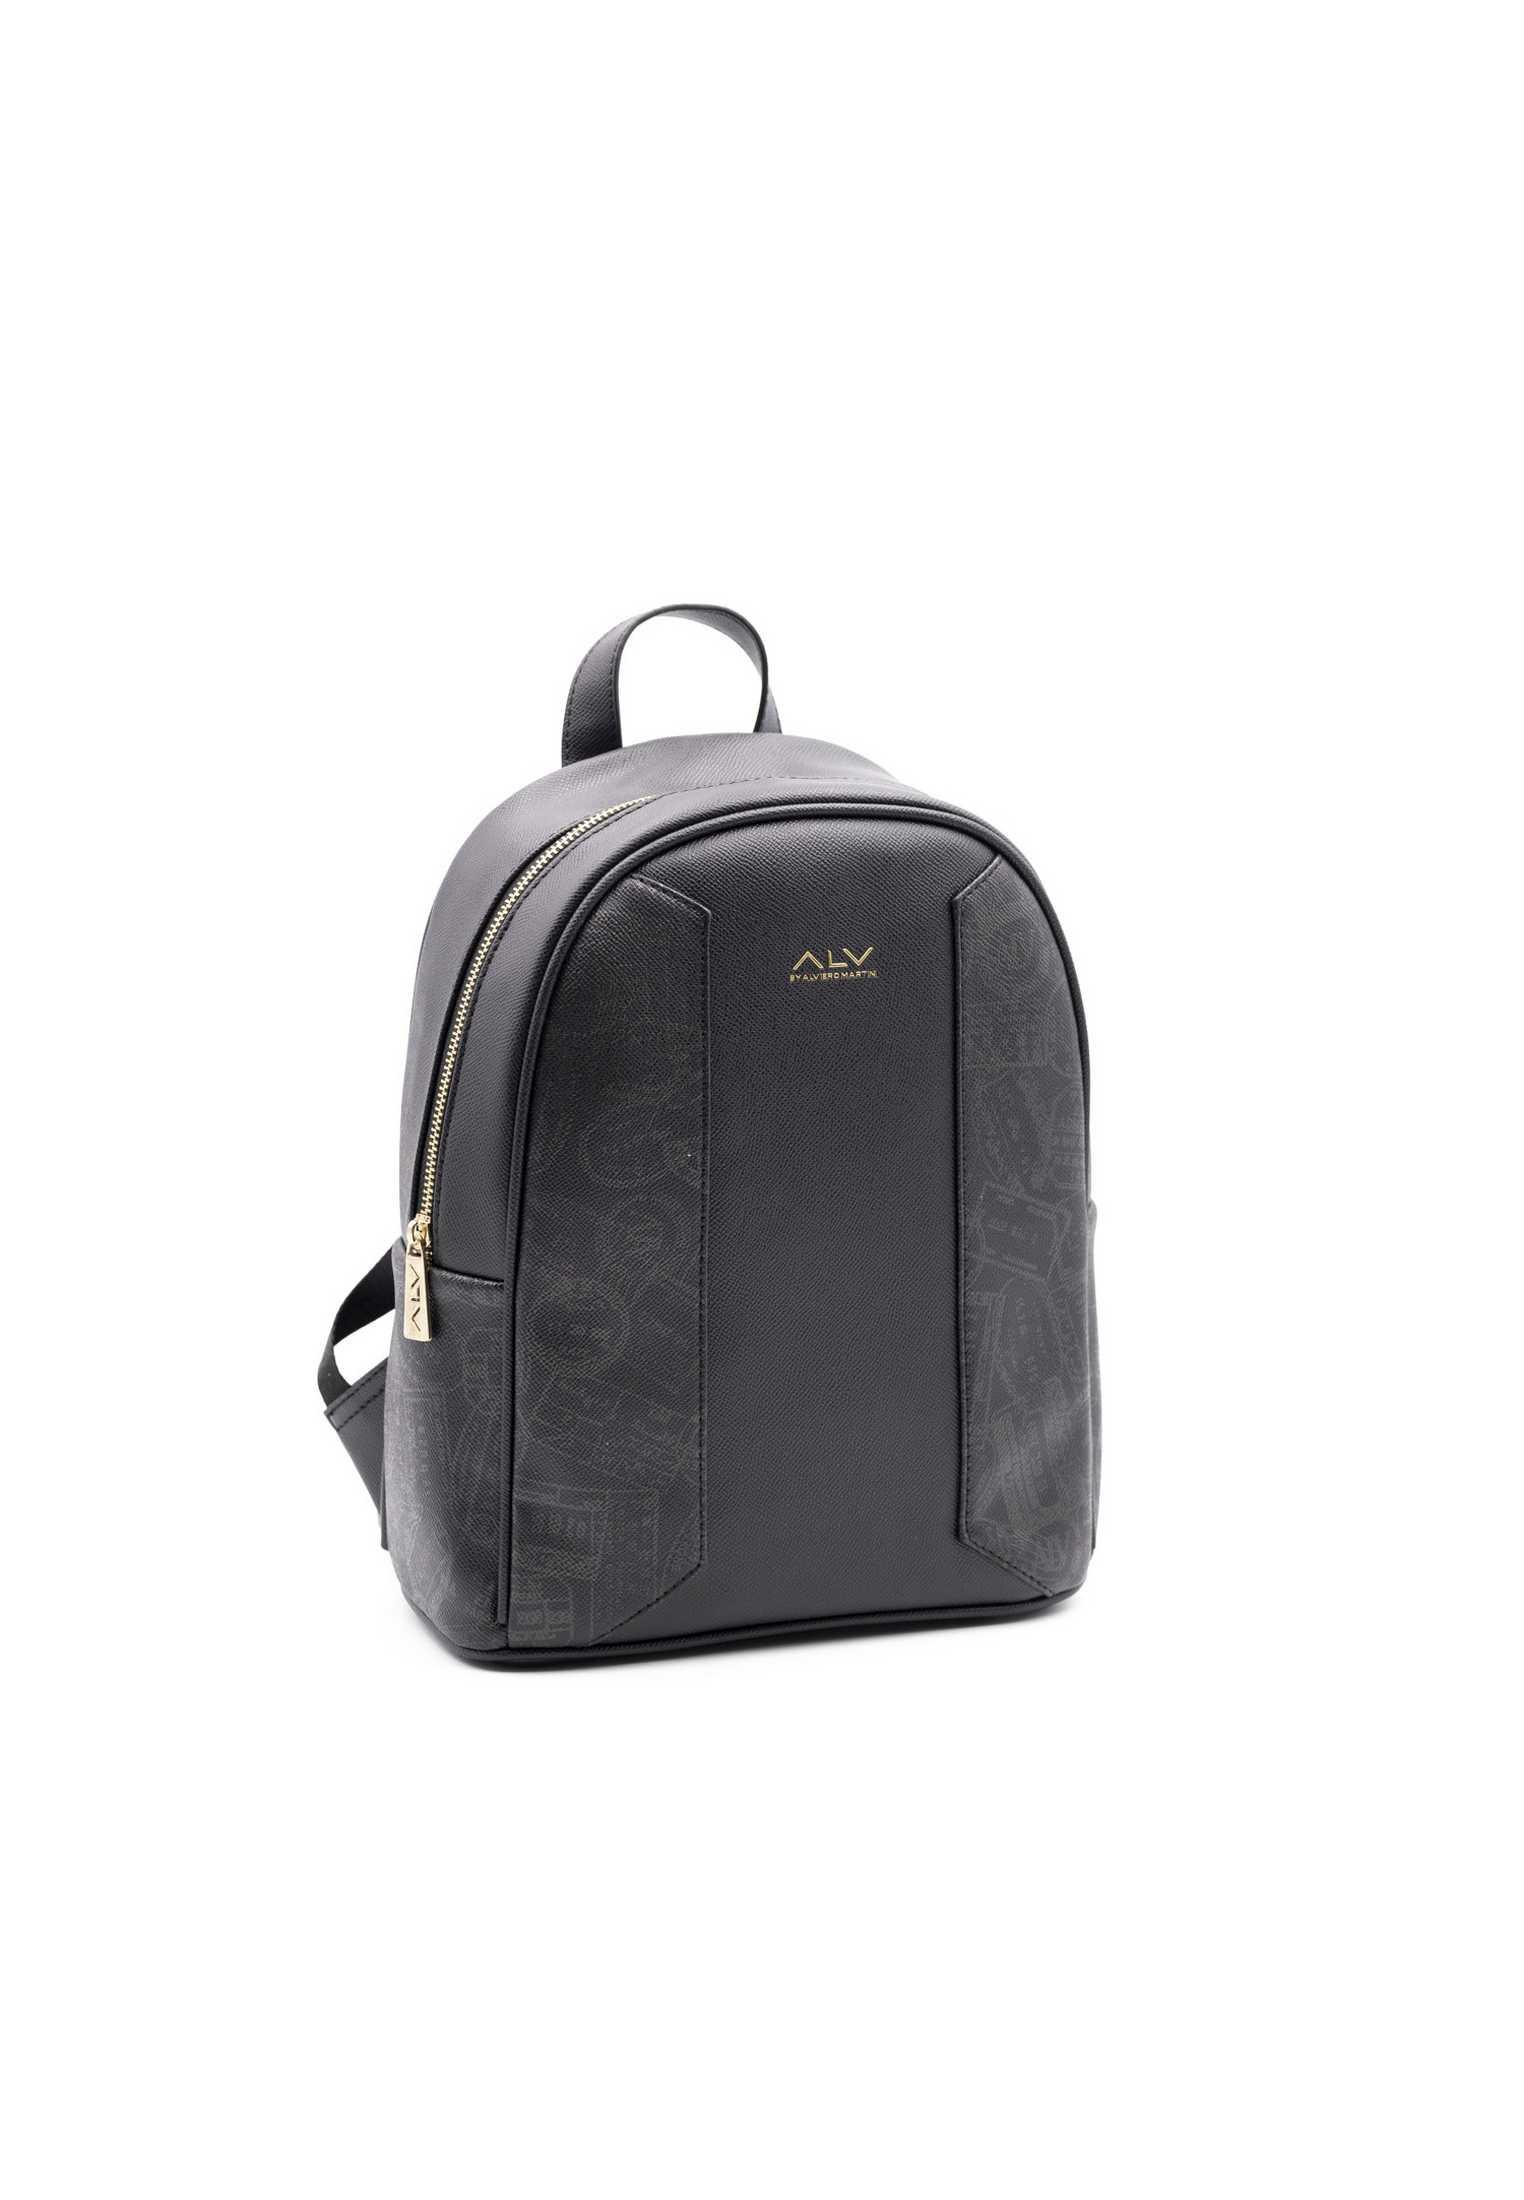 ALV by Alviero Martini Backpack Collection Air Bag  